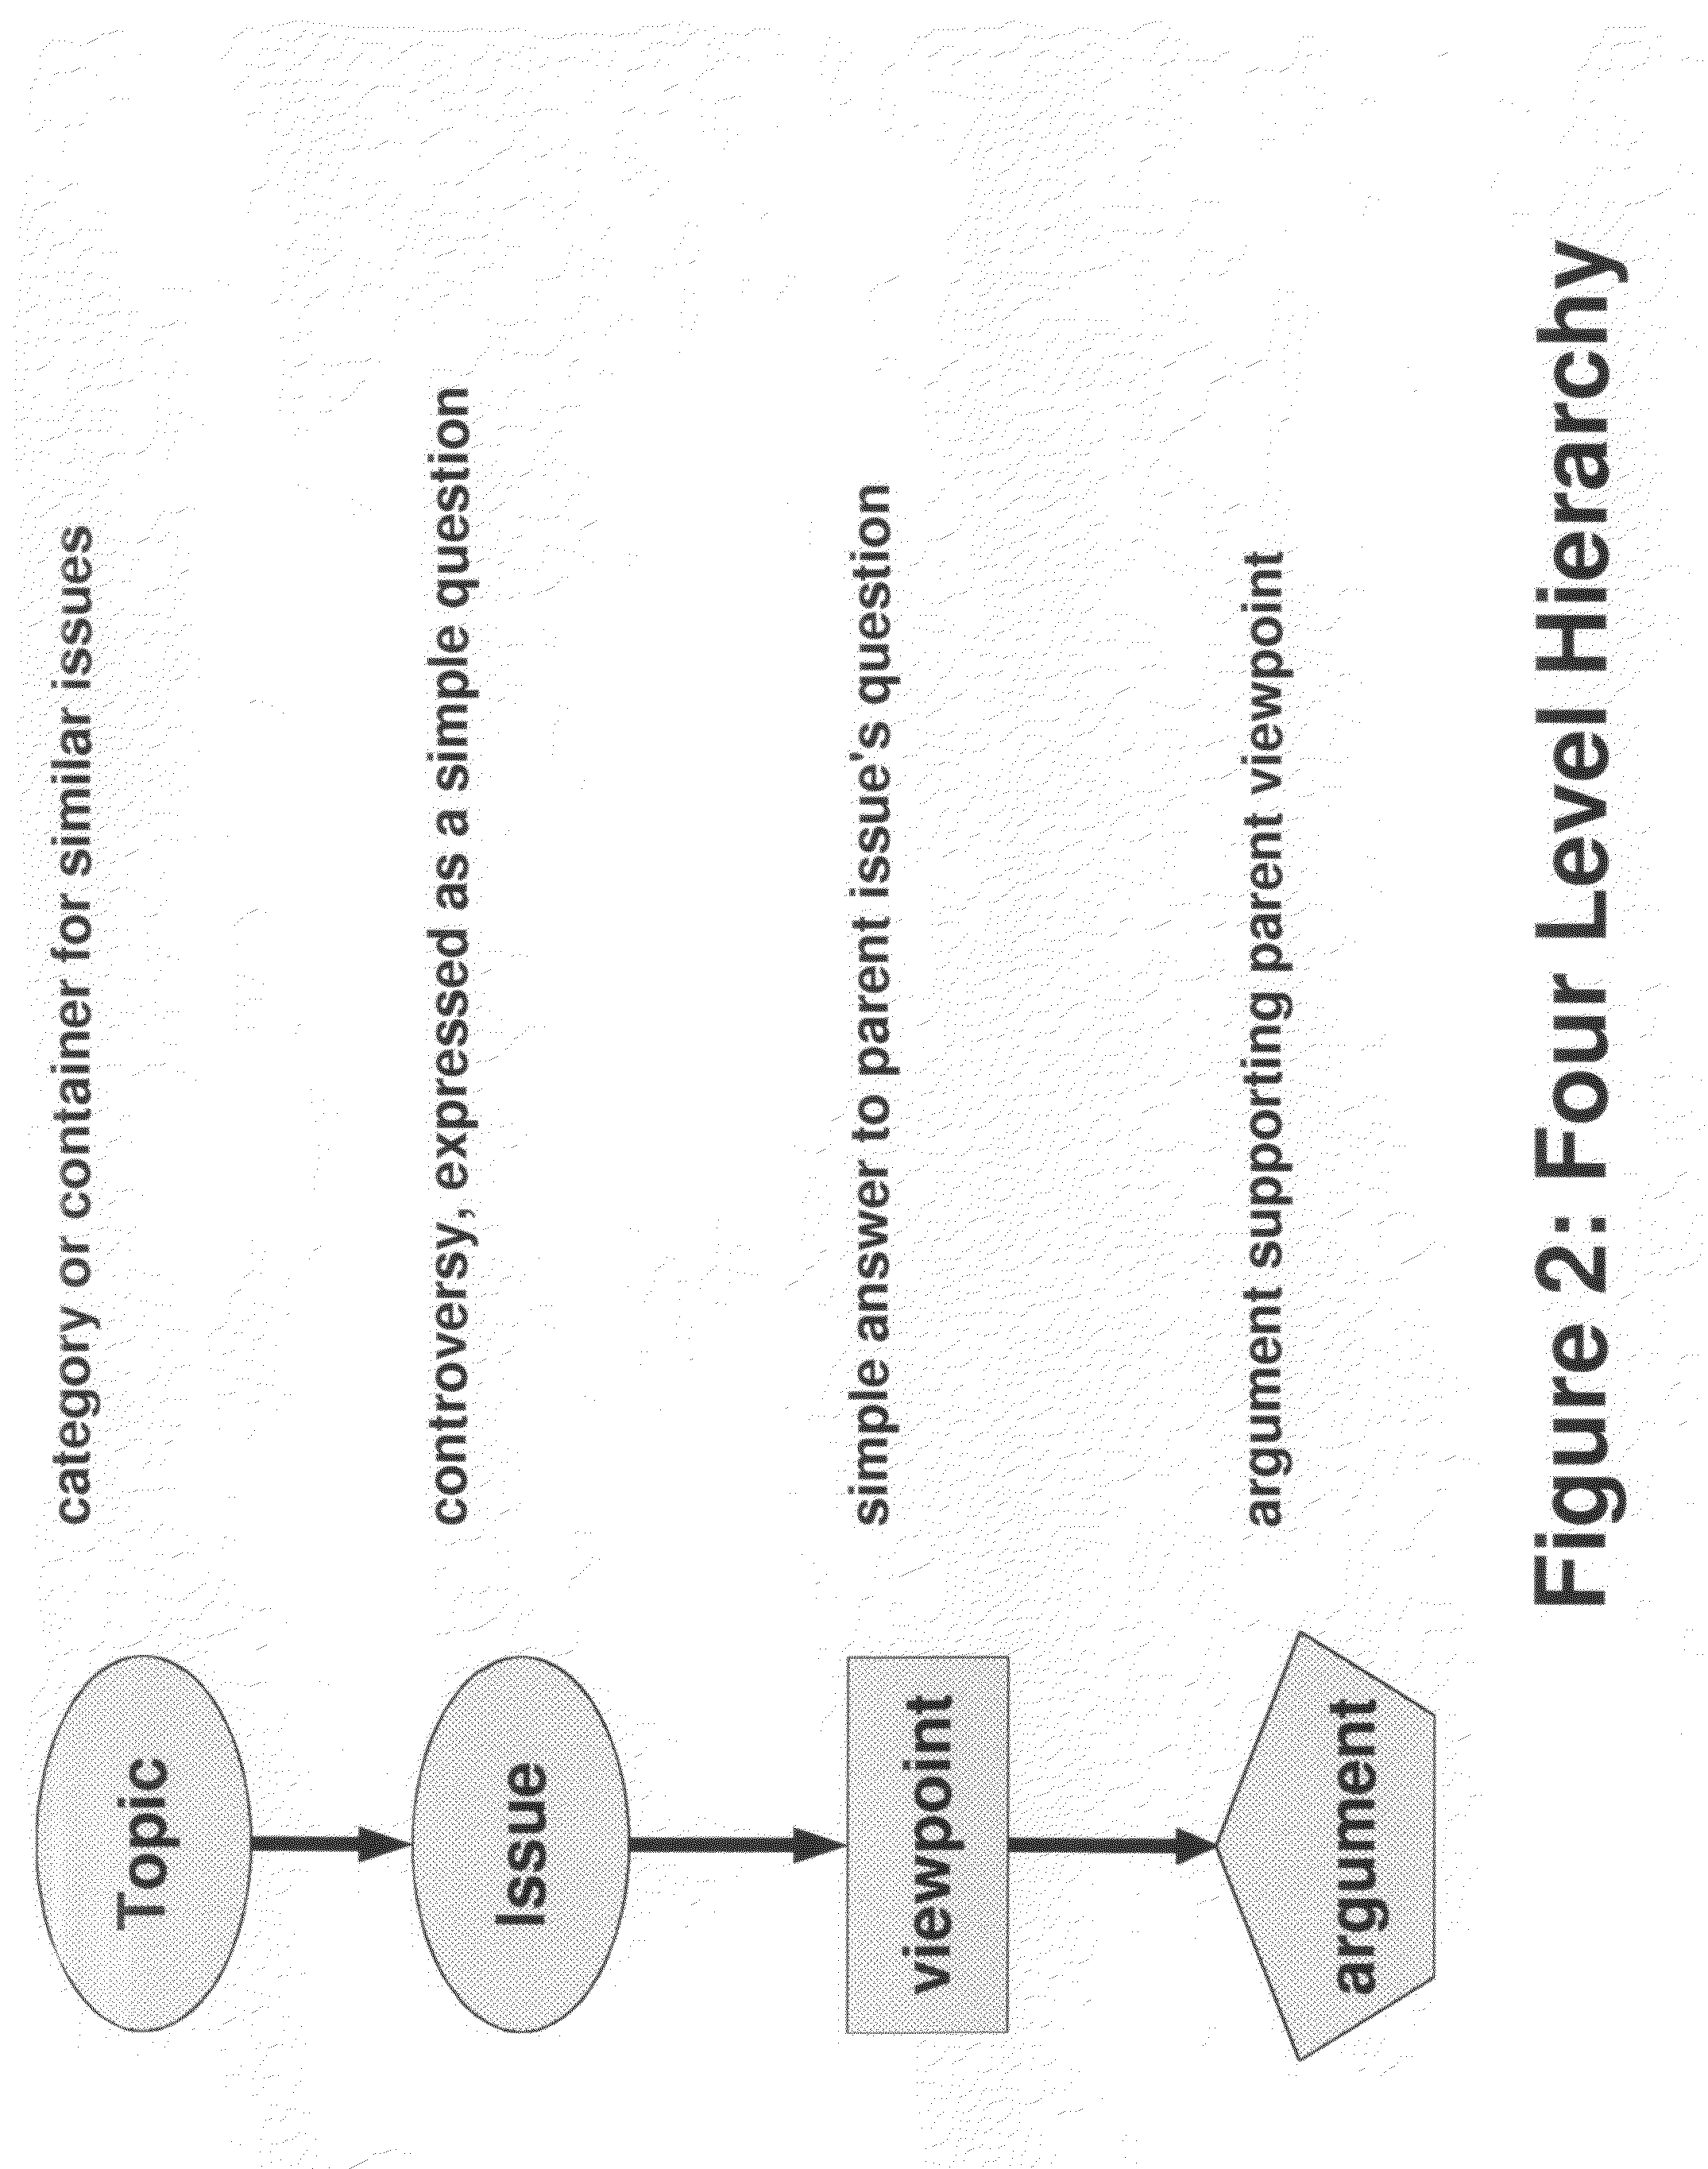 System and method for organizing and evaluating different points of view on controversial topics